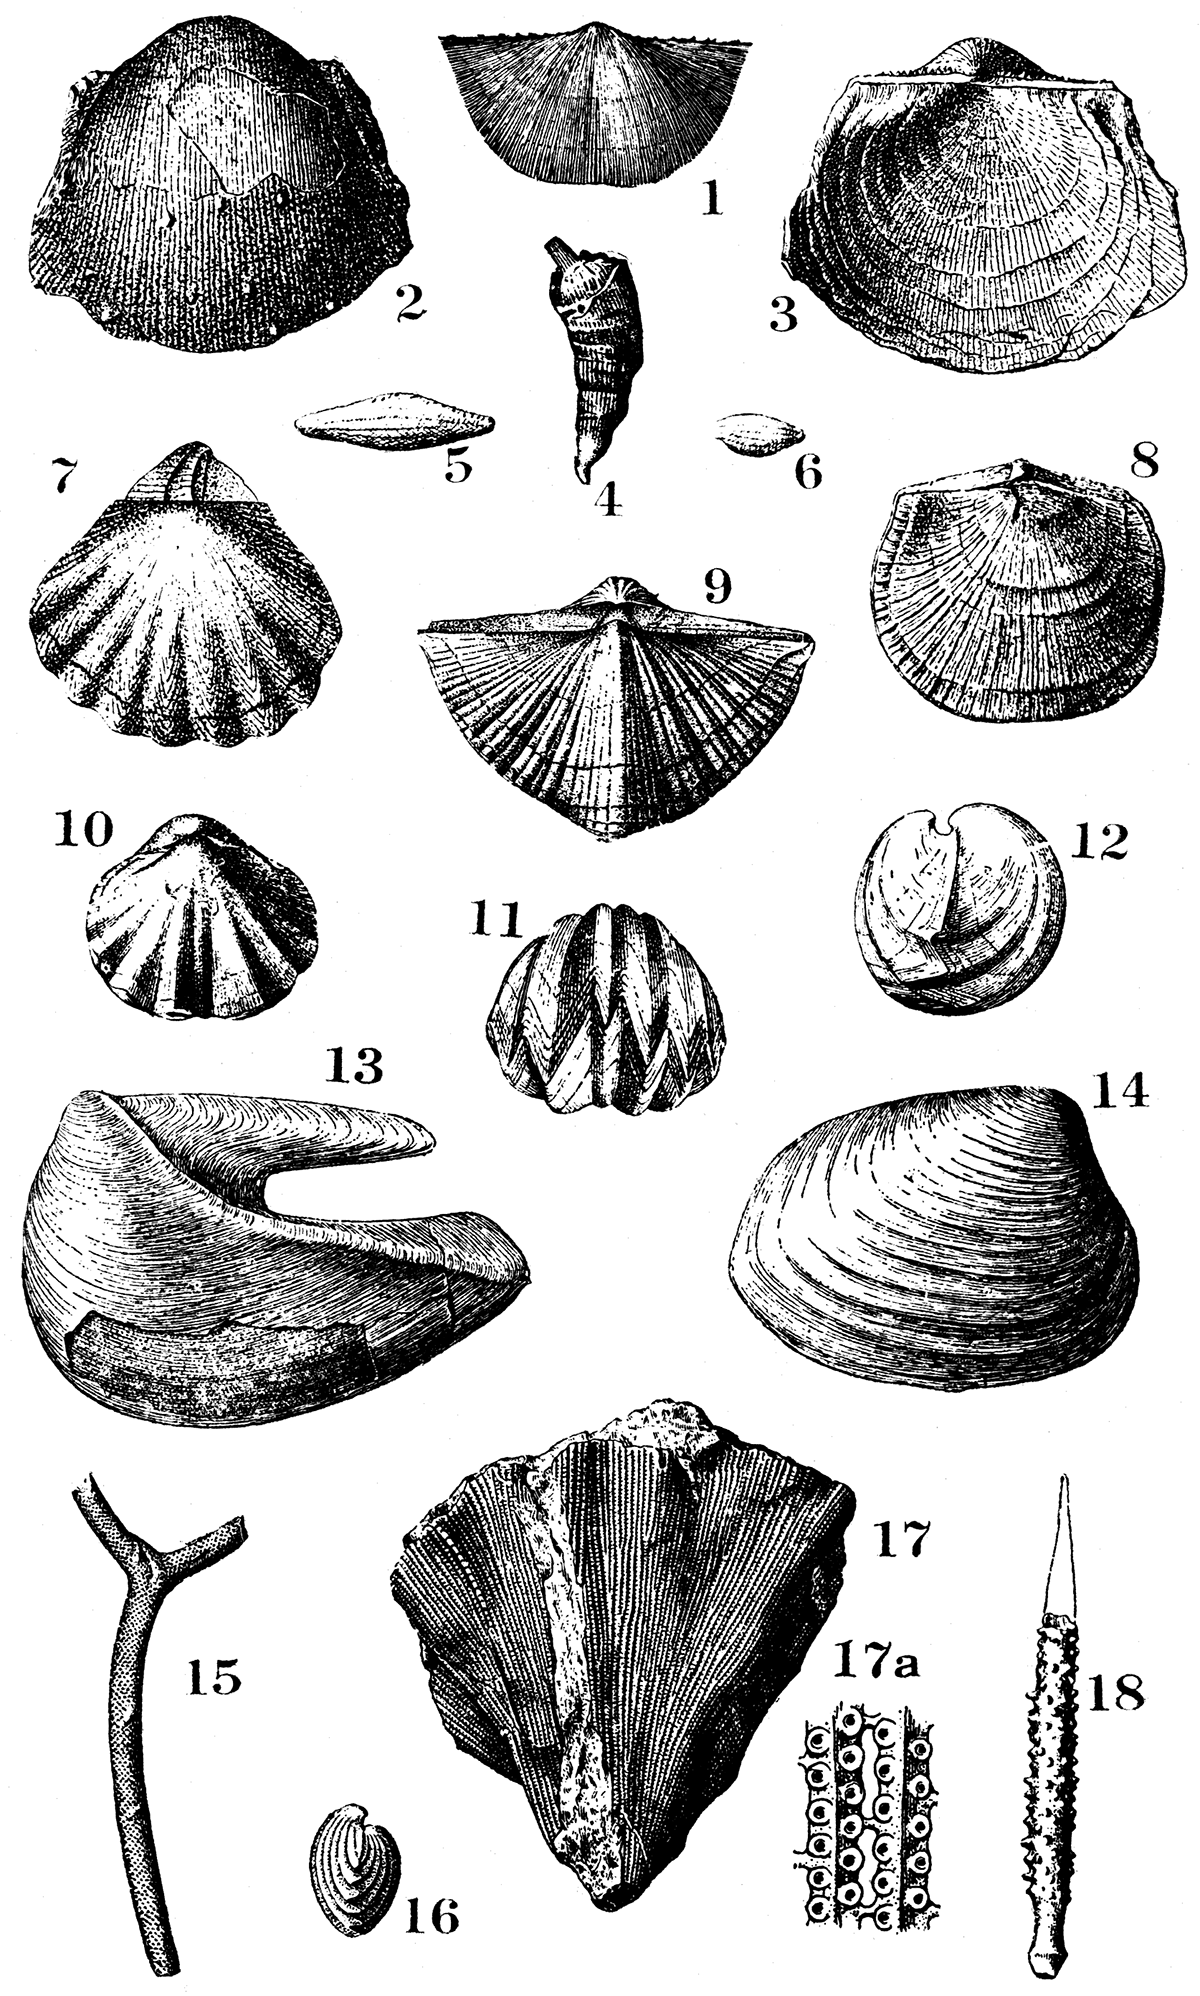 Typical fossils of the Lansing, Douglas, Shawnee and Wabaunsee formations.